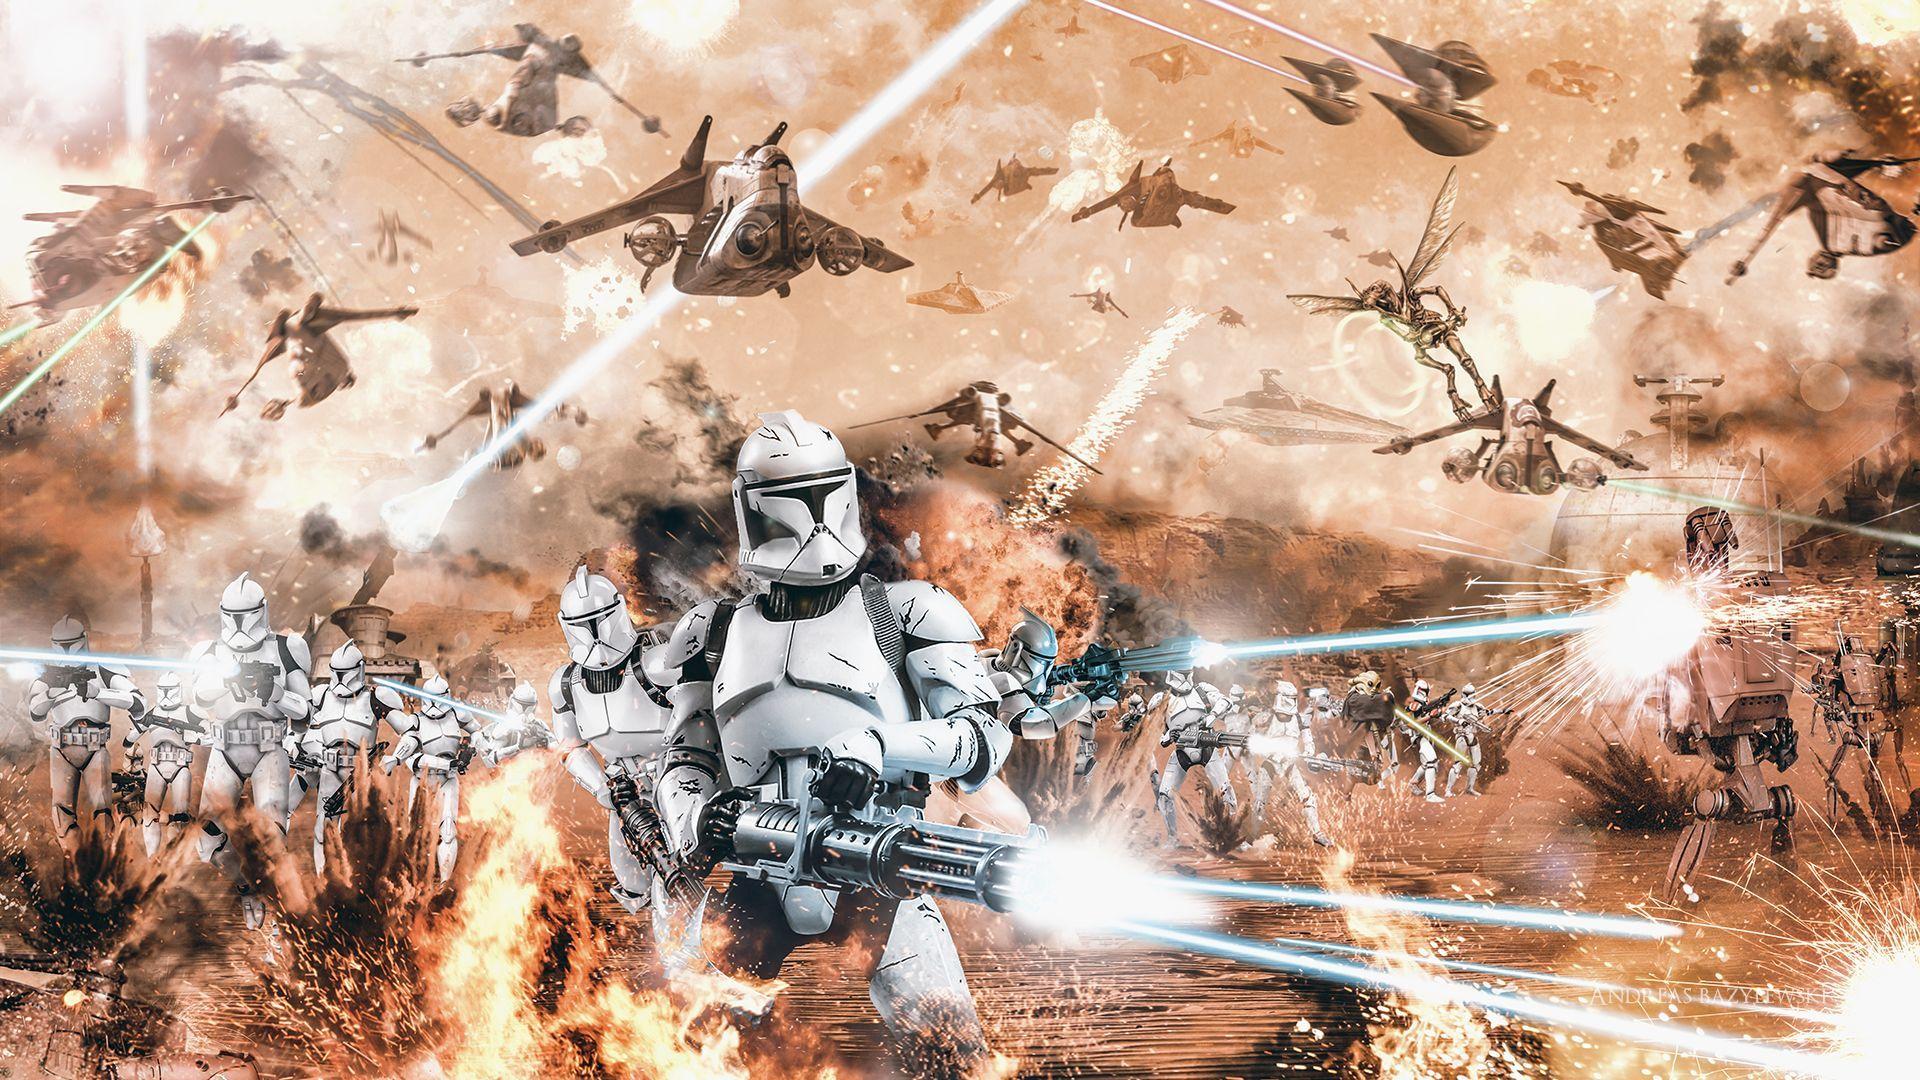 Star Wars Episode II: Attack Of The Clones.Clone army battle